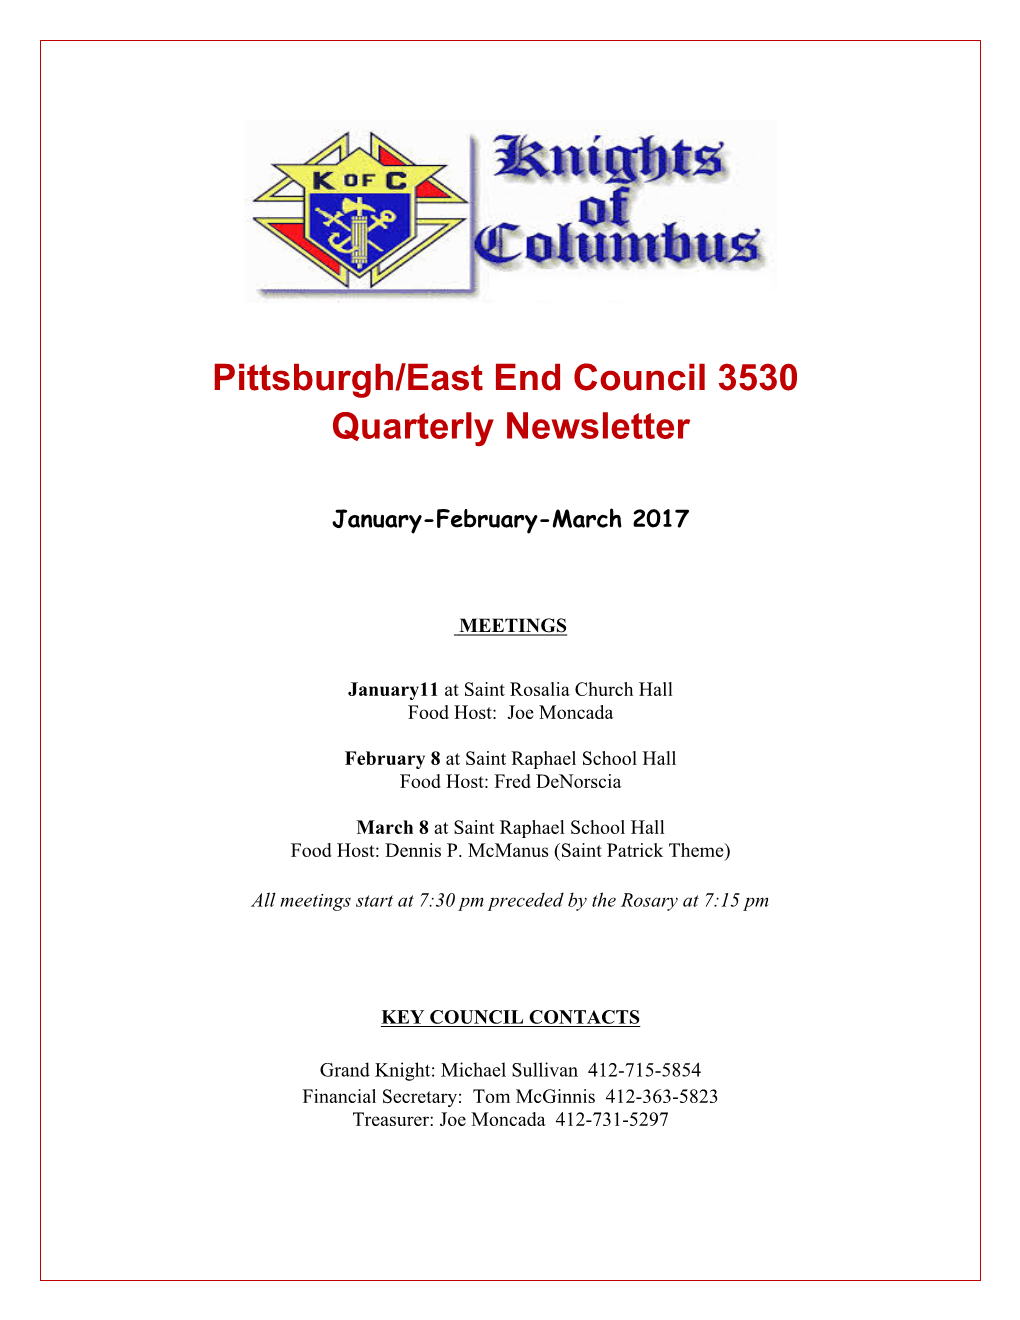 Pittsburgh/East End Council 3530 Quarterly Newsletter